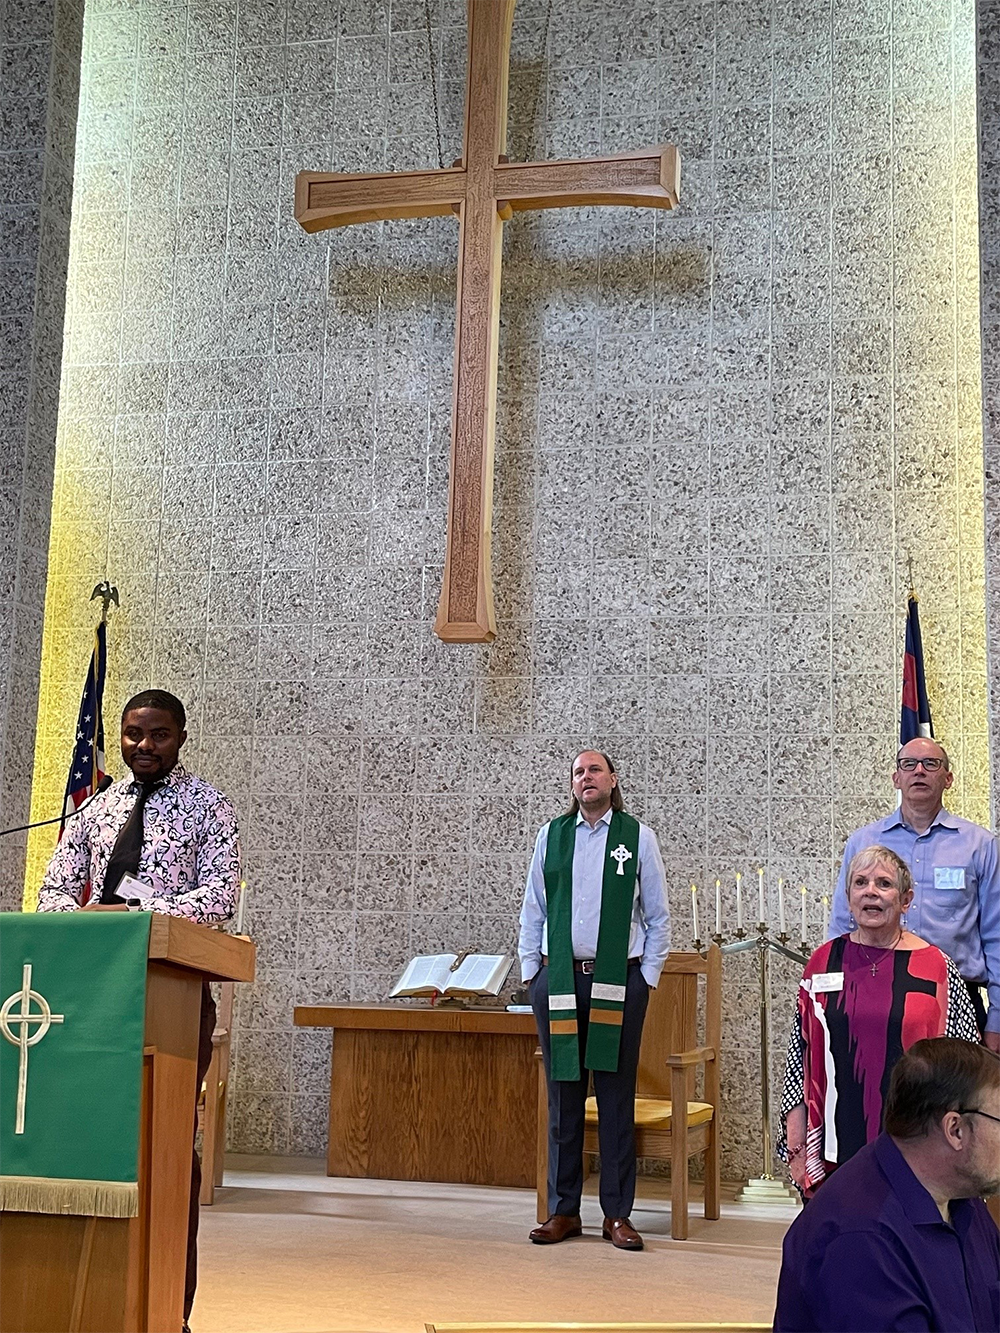 The Rev. Nathan Sautter (in green stole), pastor of the Cottonwood Presbyterian Church in Murray, leads worship on Sunday morning. Photo by Emily Odom.